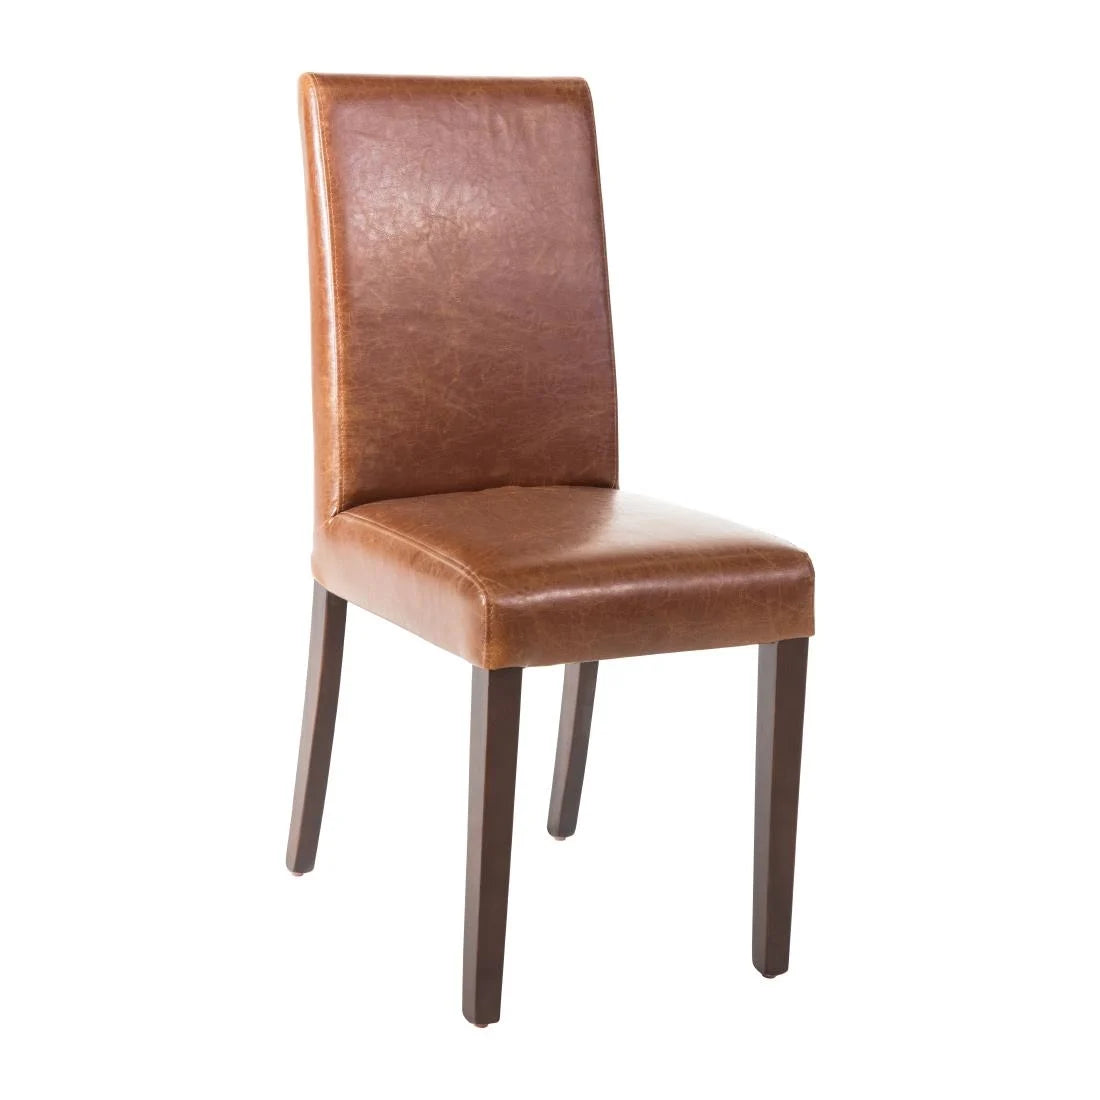 Bolero Faux Leather Dining Chair Antique Tan (Pack of 2) JD Catering Equipment Solutions Ltd